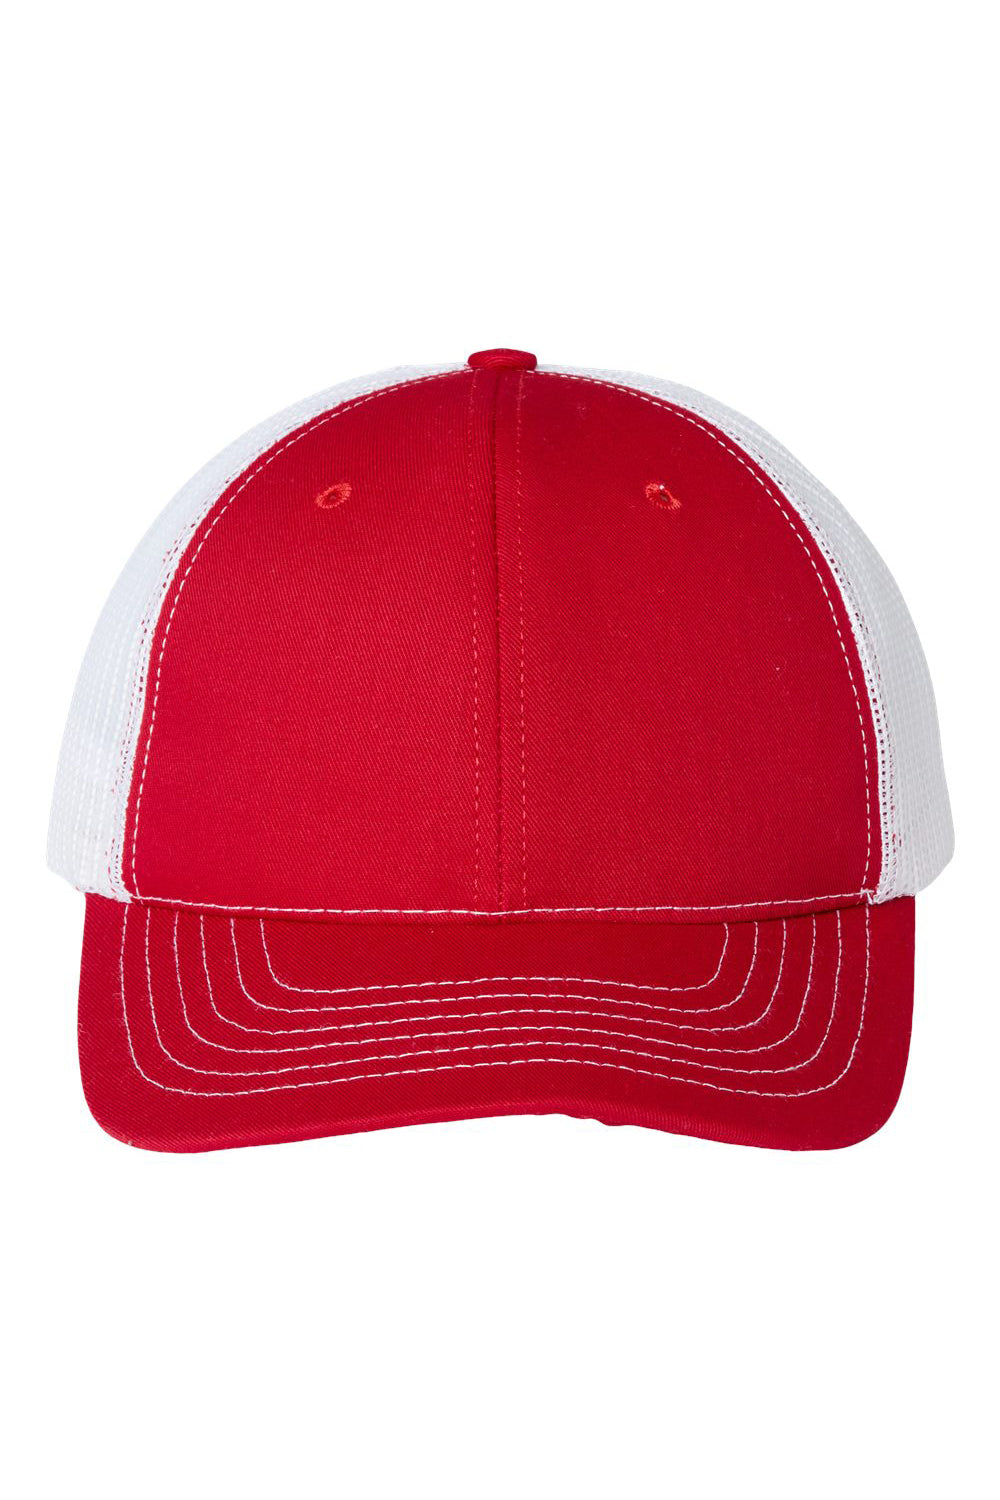 Classic Caps USA100 Mens USA Made Trucker Hat Red/White Flat Front